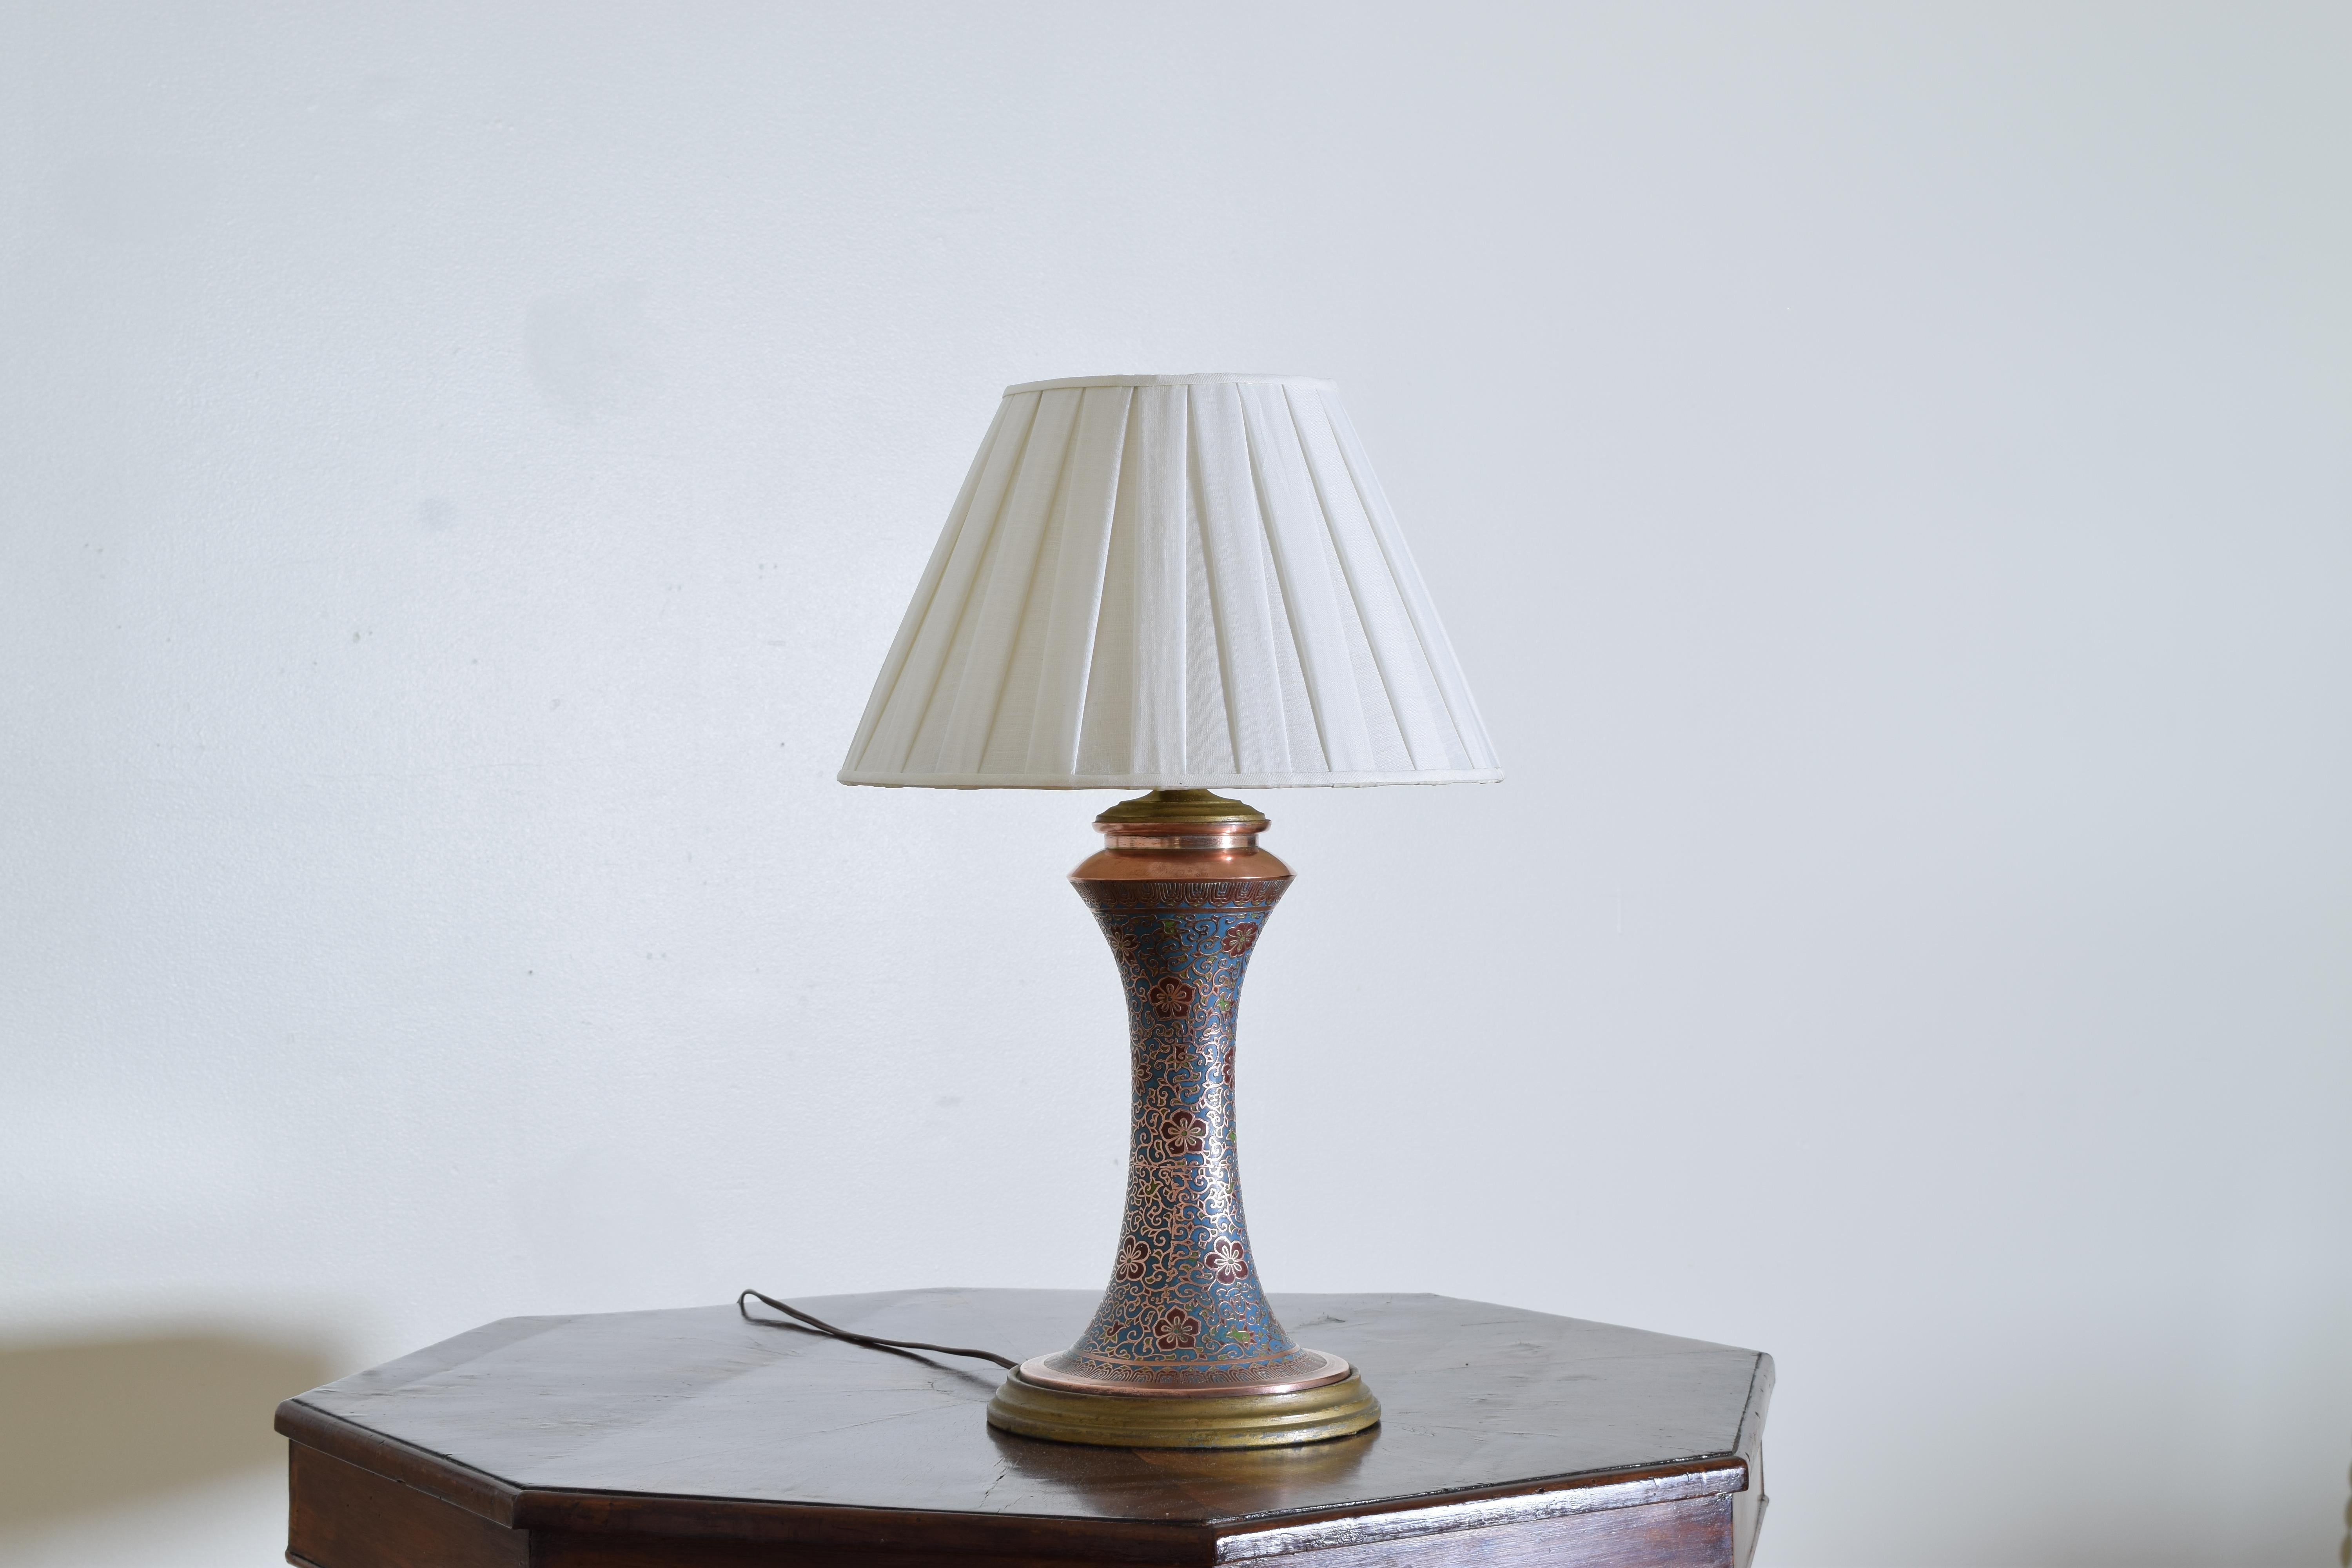 Japanese Cloisonné Copper and Enamel Table Lamp, 1st Quarter 20th Century In Good Condition For Sale In Atlanta, GA